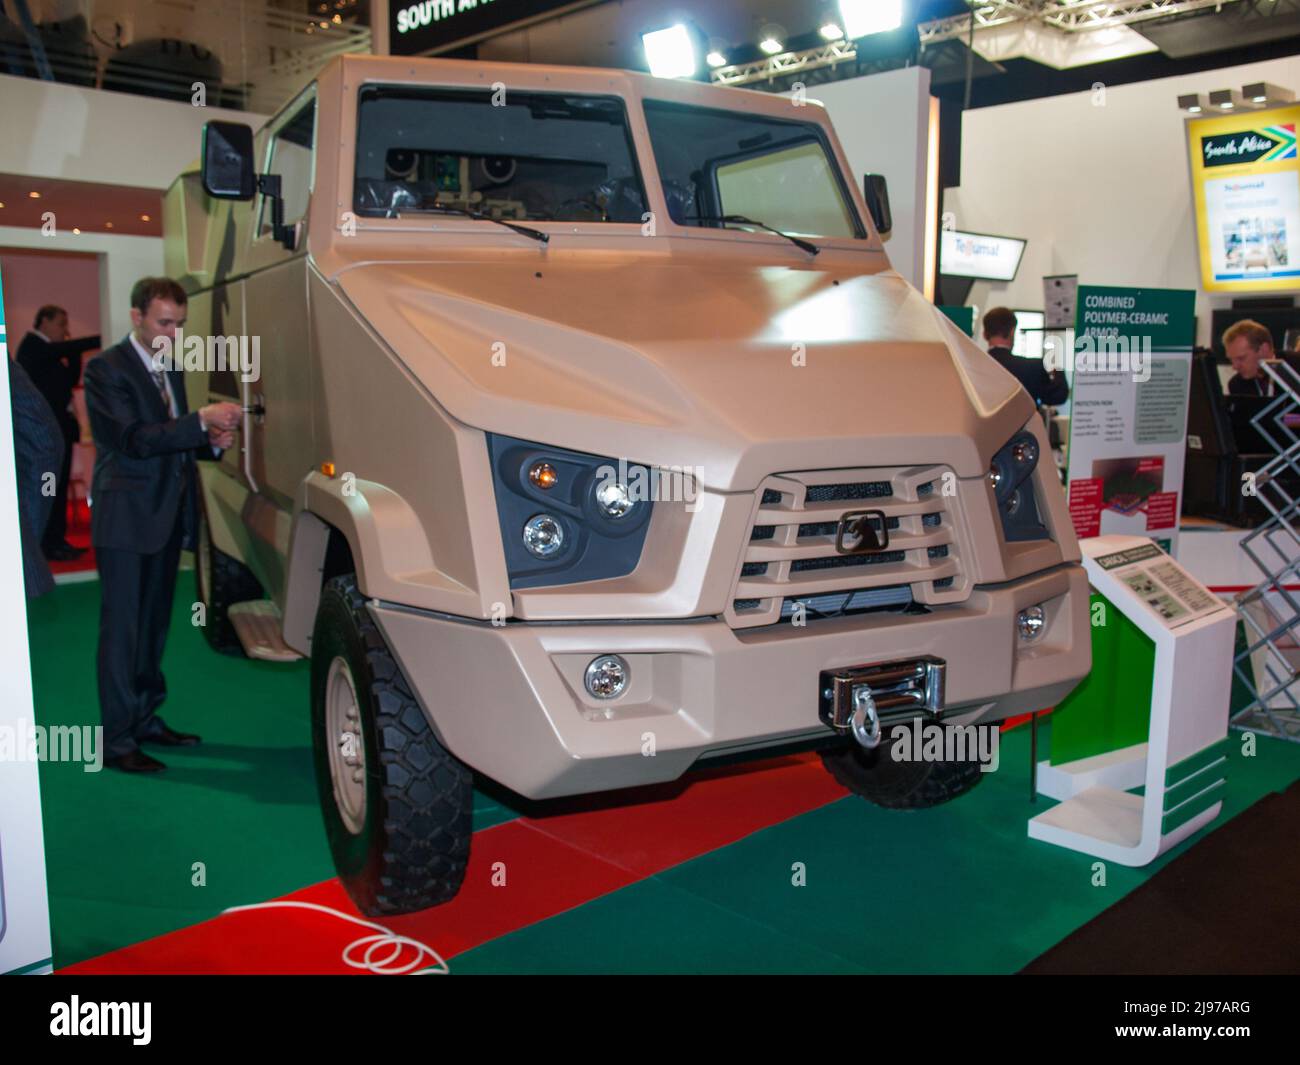 Abu Dhabi, UAE - Feb.23. 2011: Belarus Beltech holding CARACAL self-propelled guided missile complex at IDEX 2011 Stock Photo